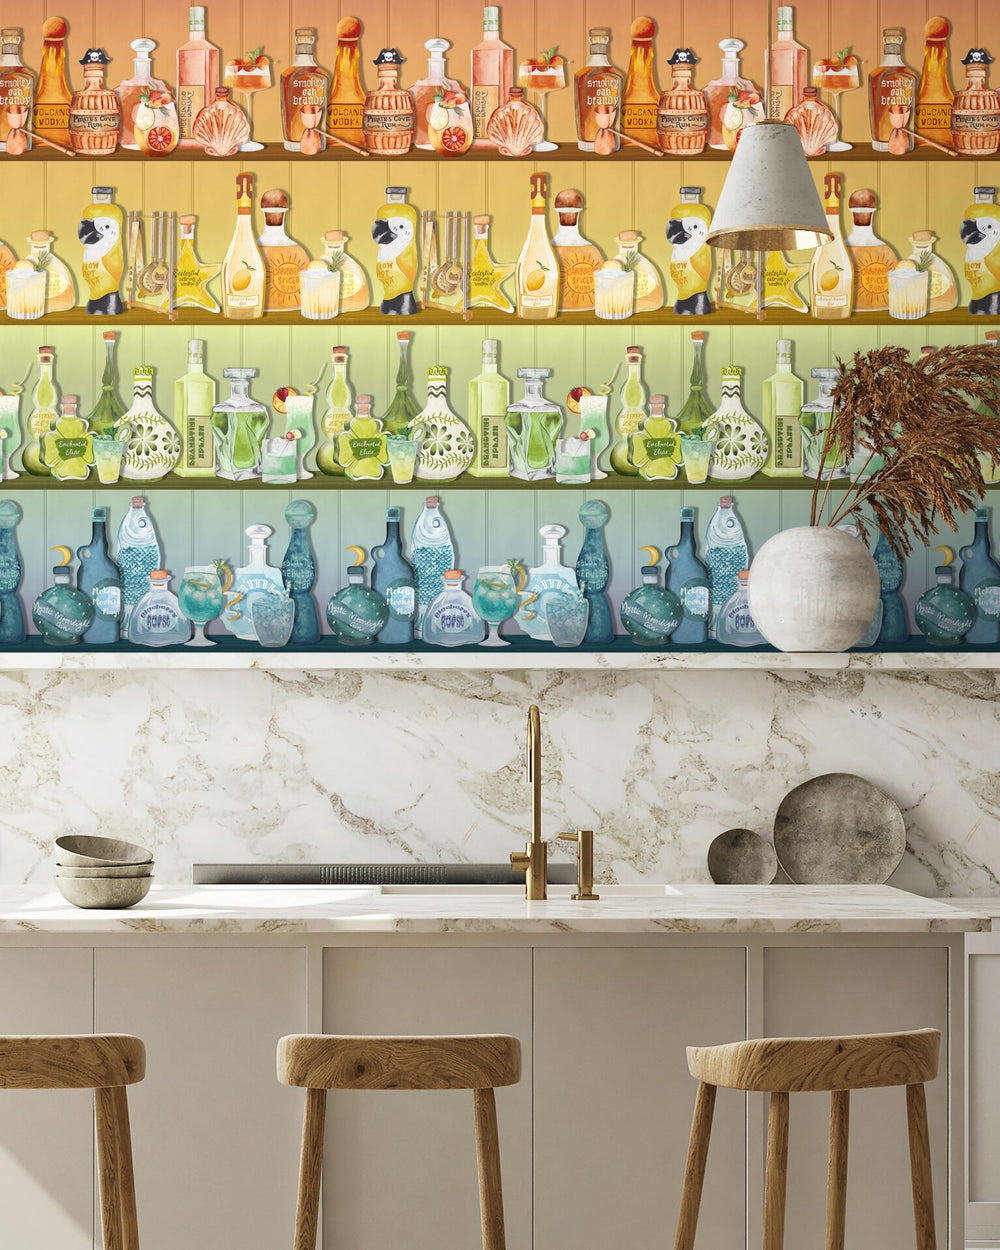 Brand-Mckenzie-Paper-paradise-mixology-wallpaper-cocktail-bar-rows-bottle-colourful-cut-glass-rainbow-colourful-background